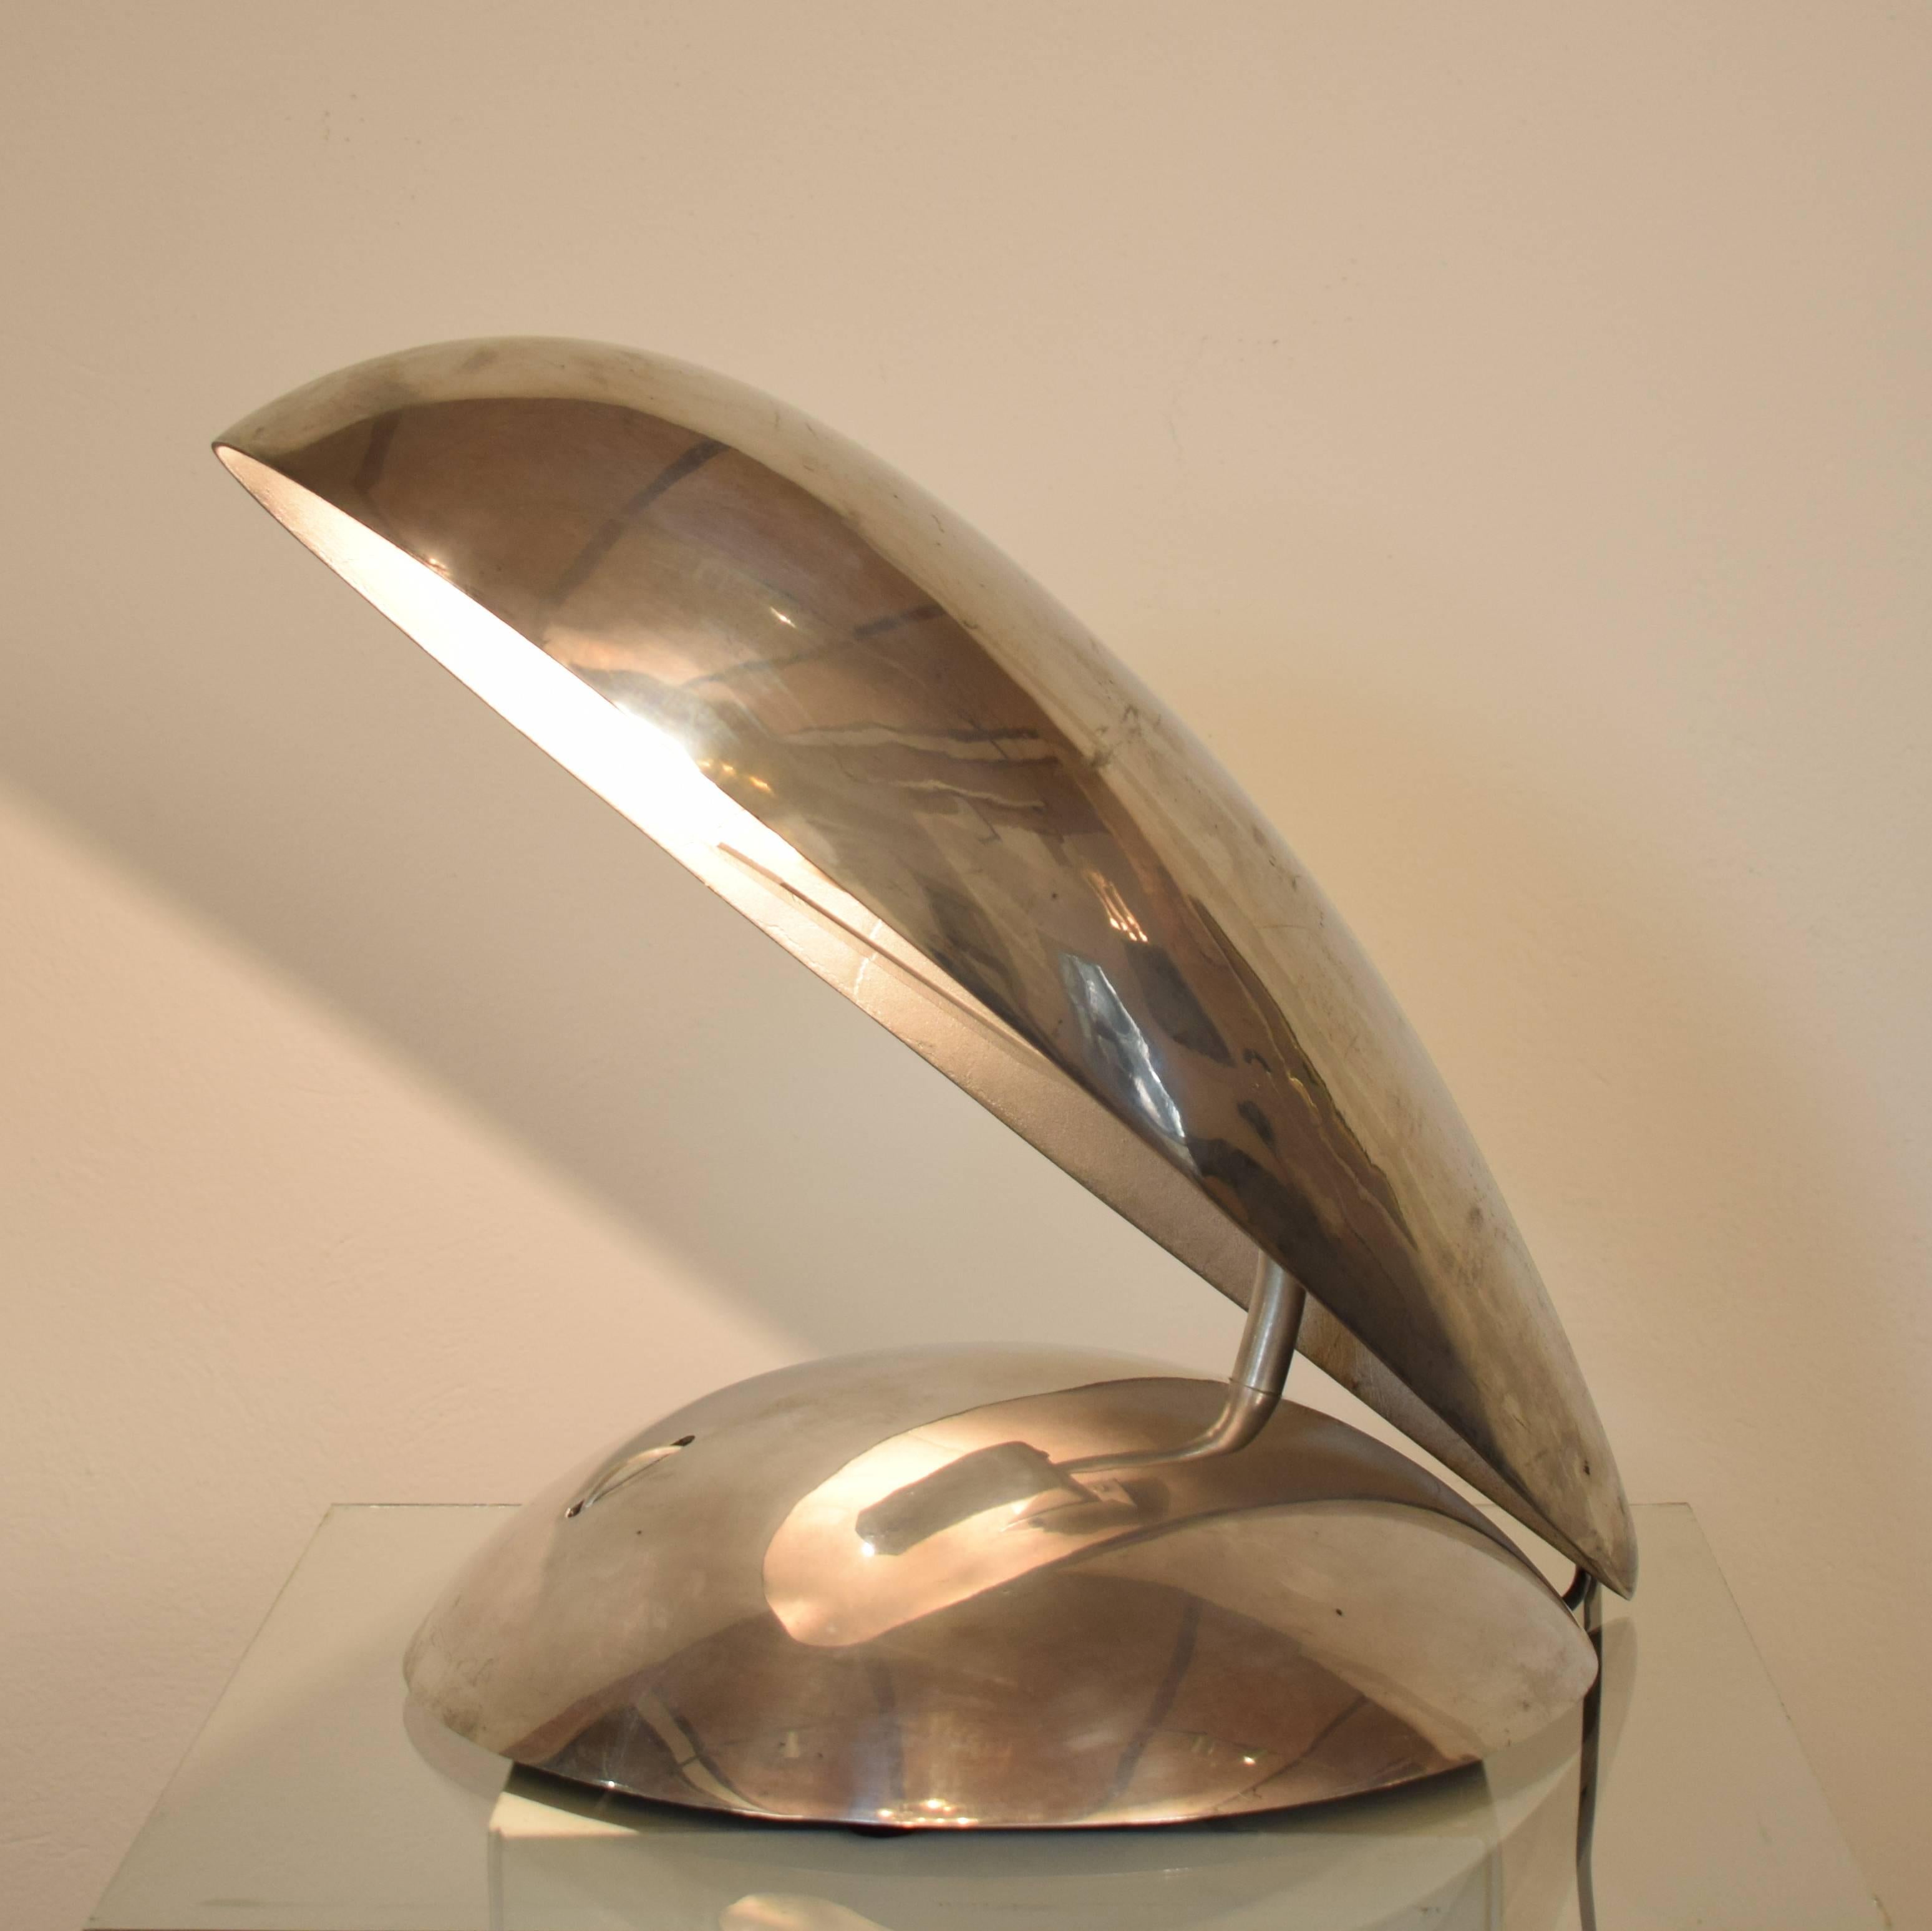 American Polished Aluminium Space Age Table Lamp from the 1980s